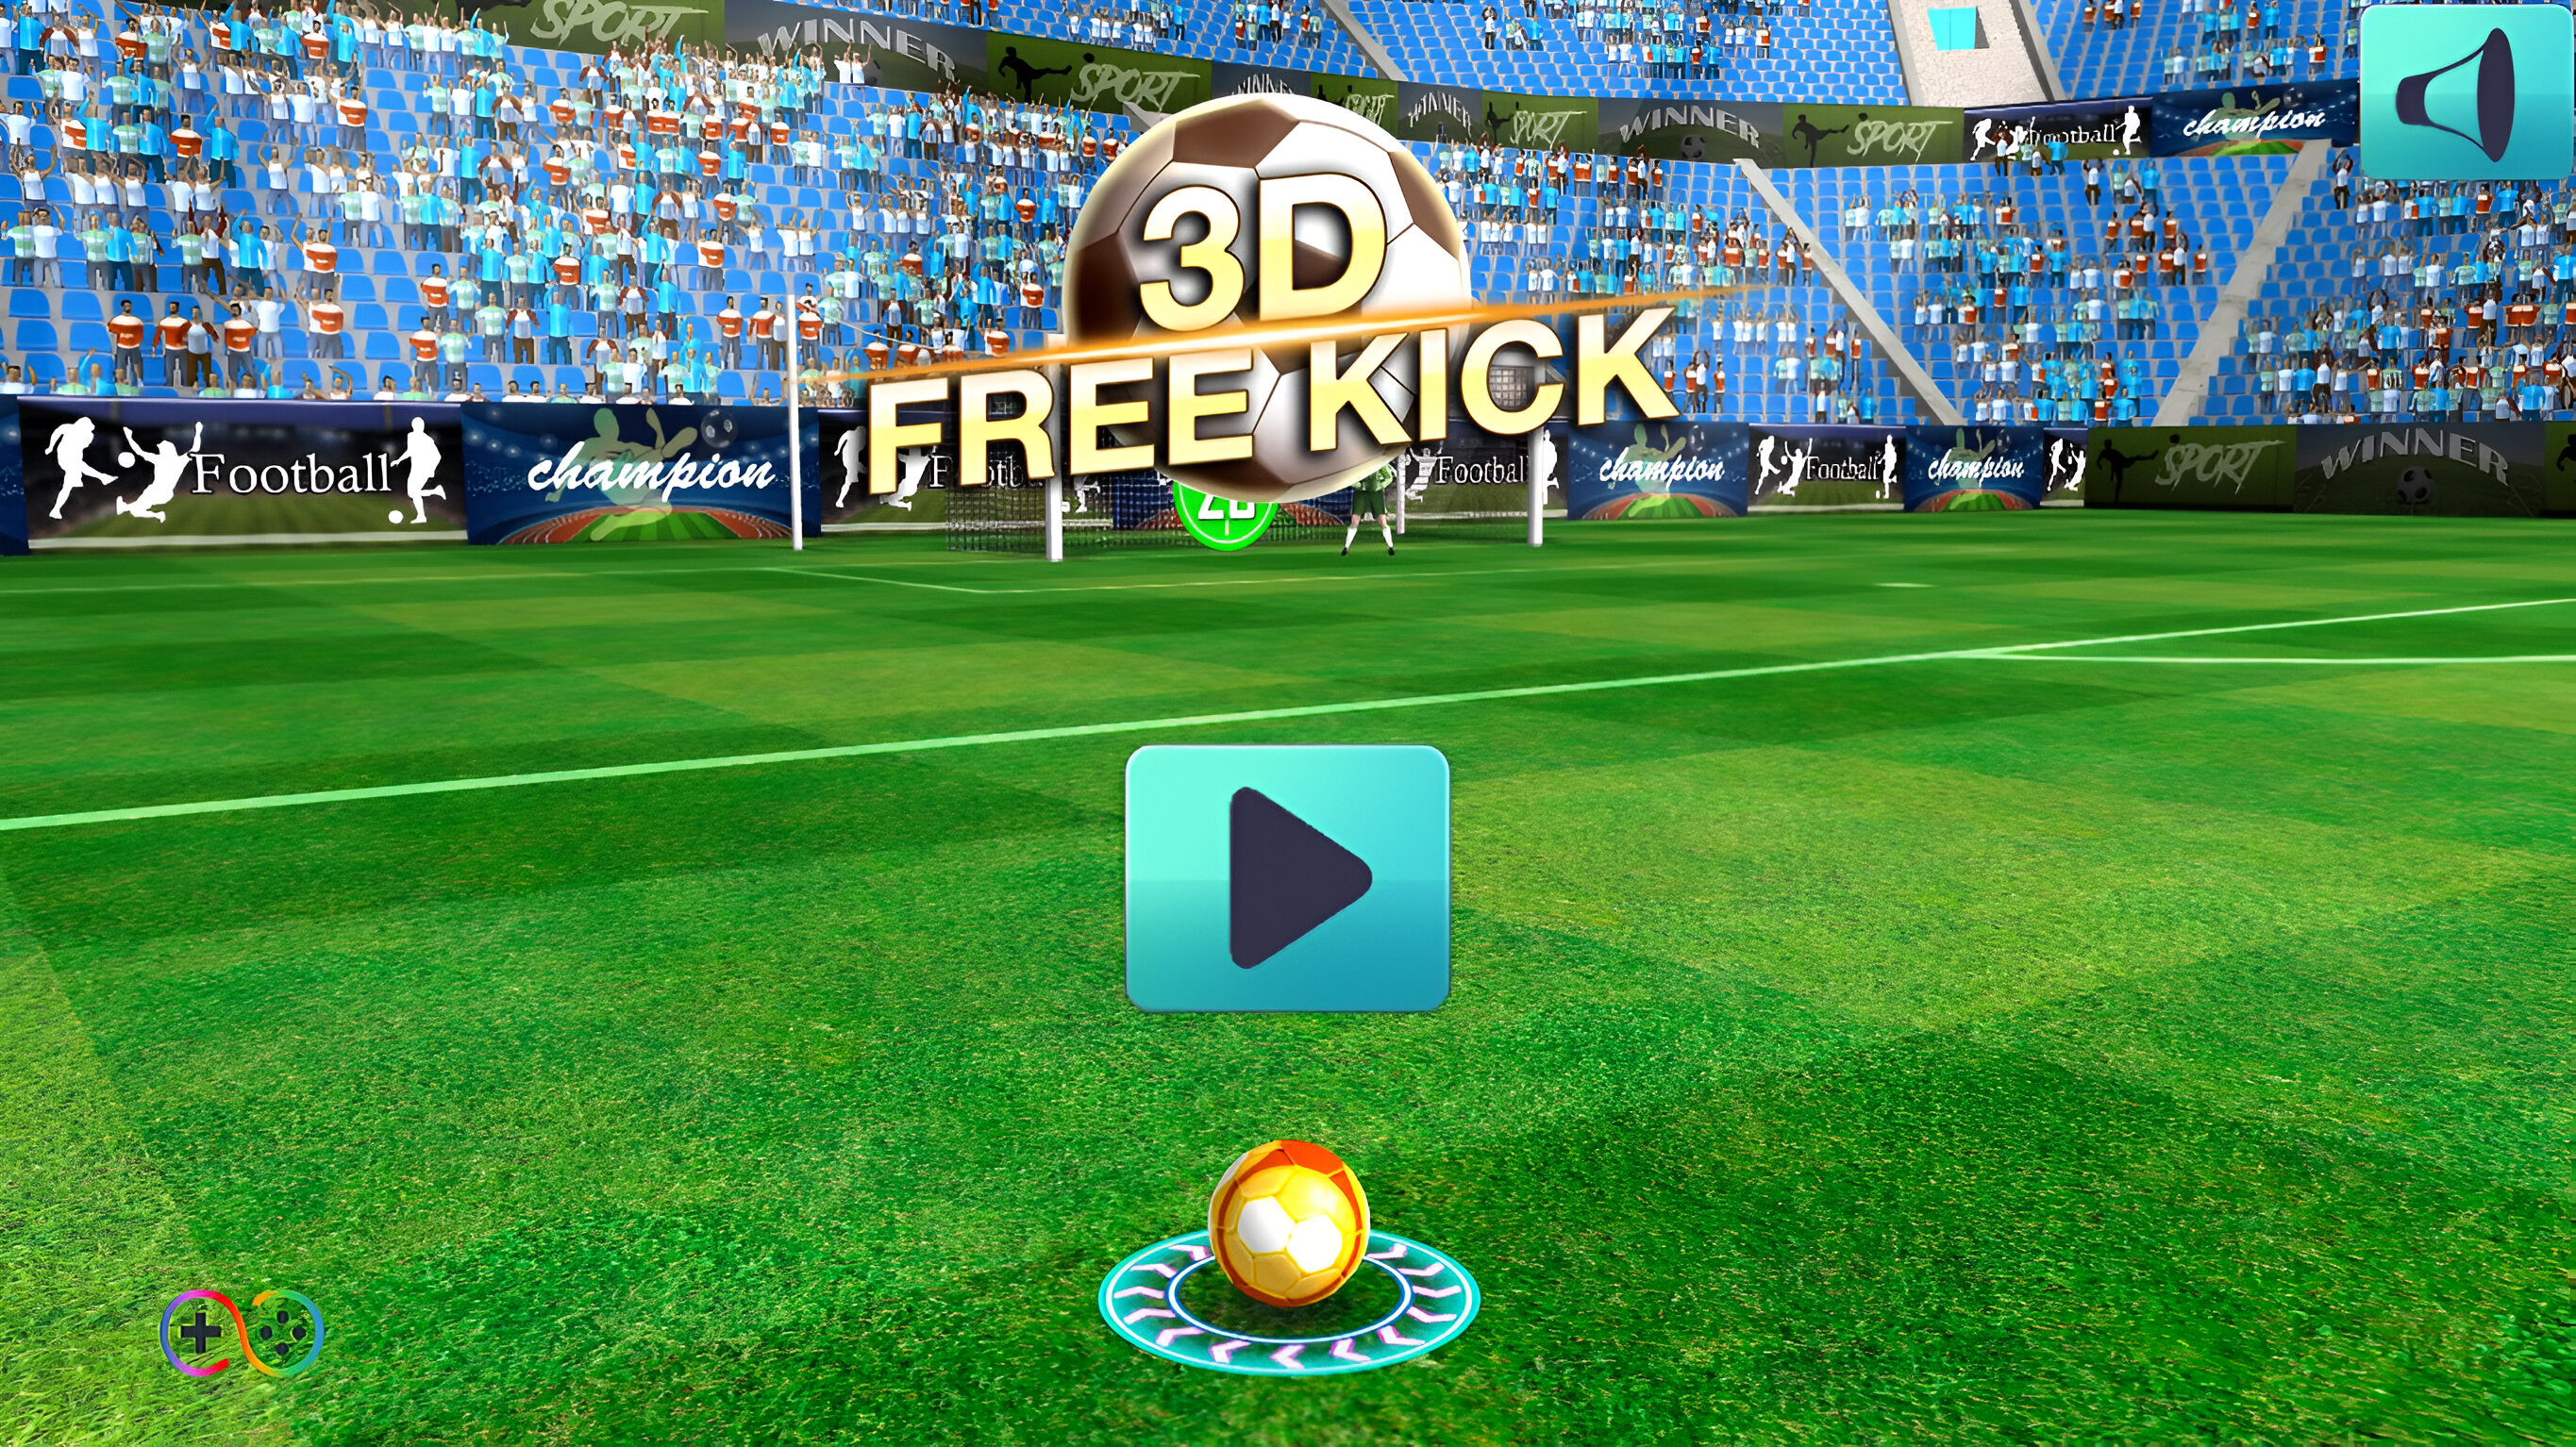 Image 3D Free Kick - Play Free Online Soccer Game